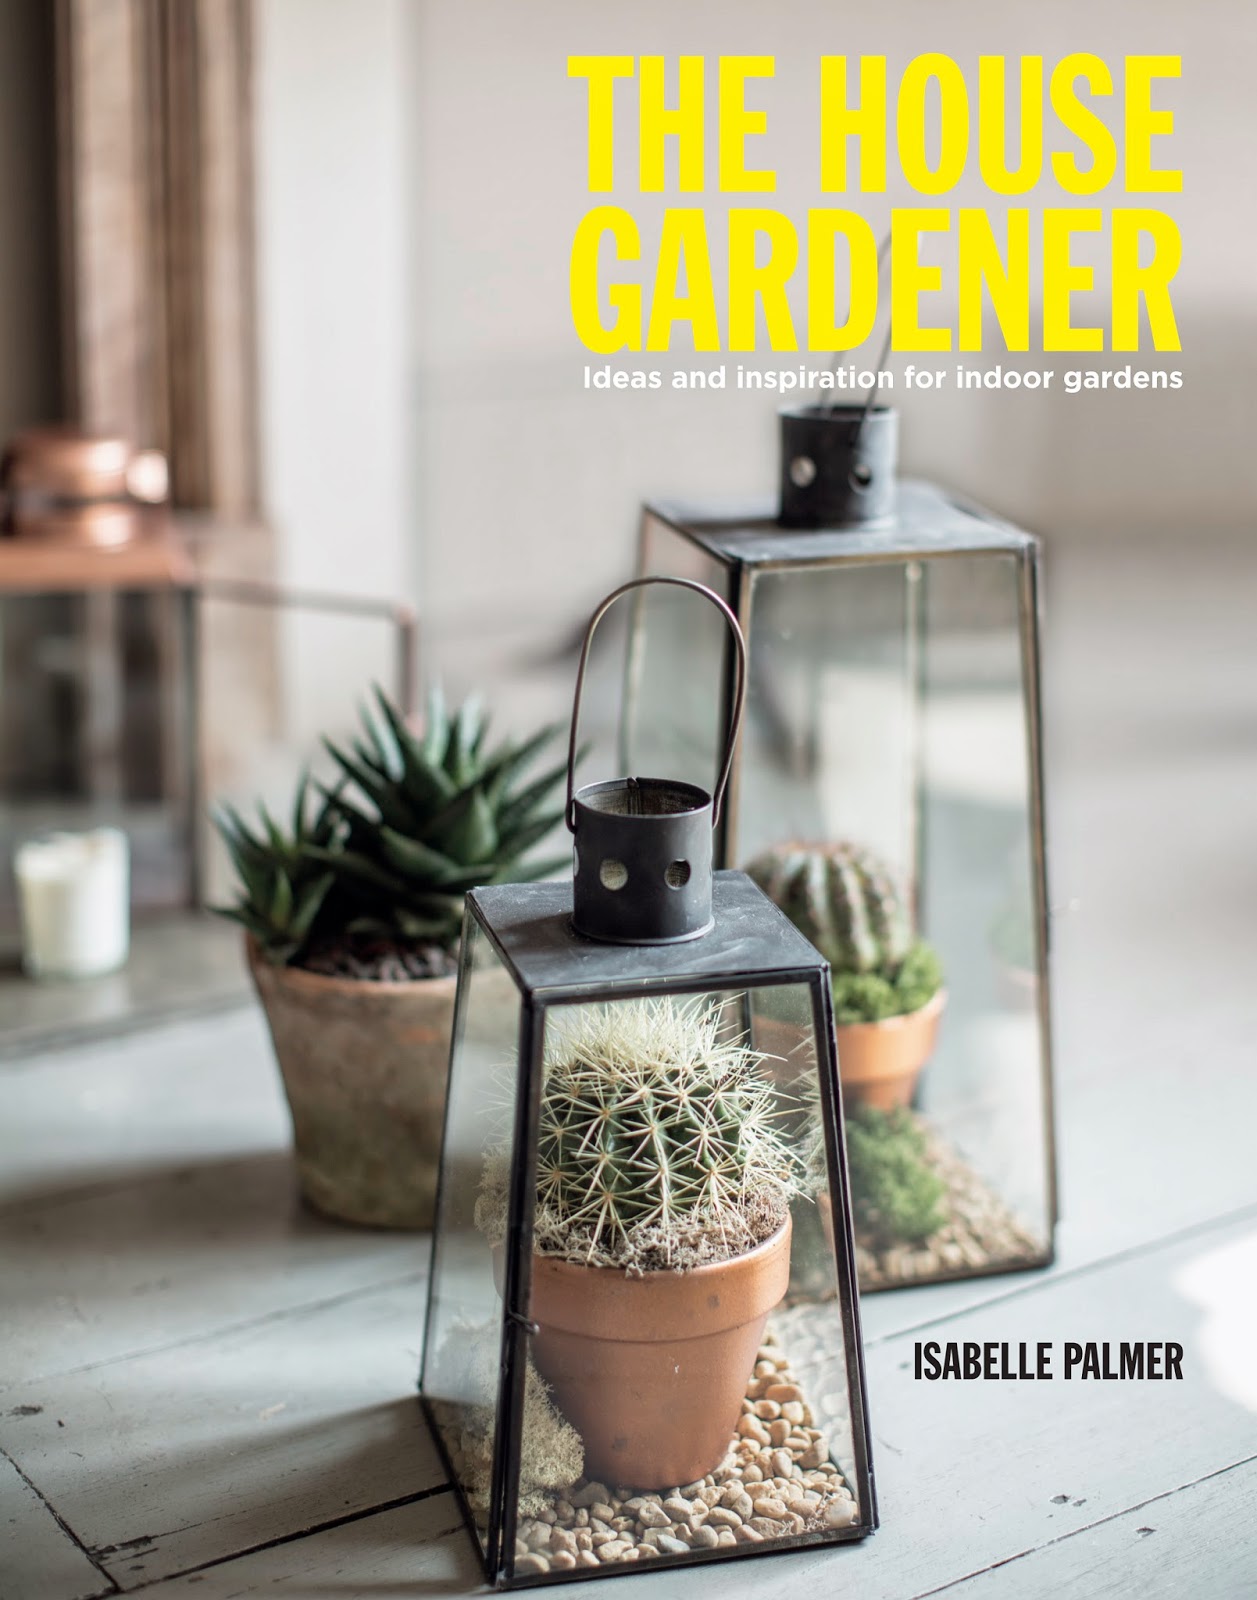 The House Gardener by Isabelle Palmer